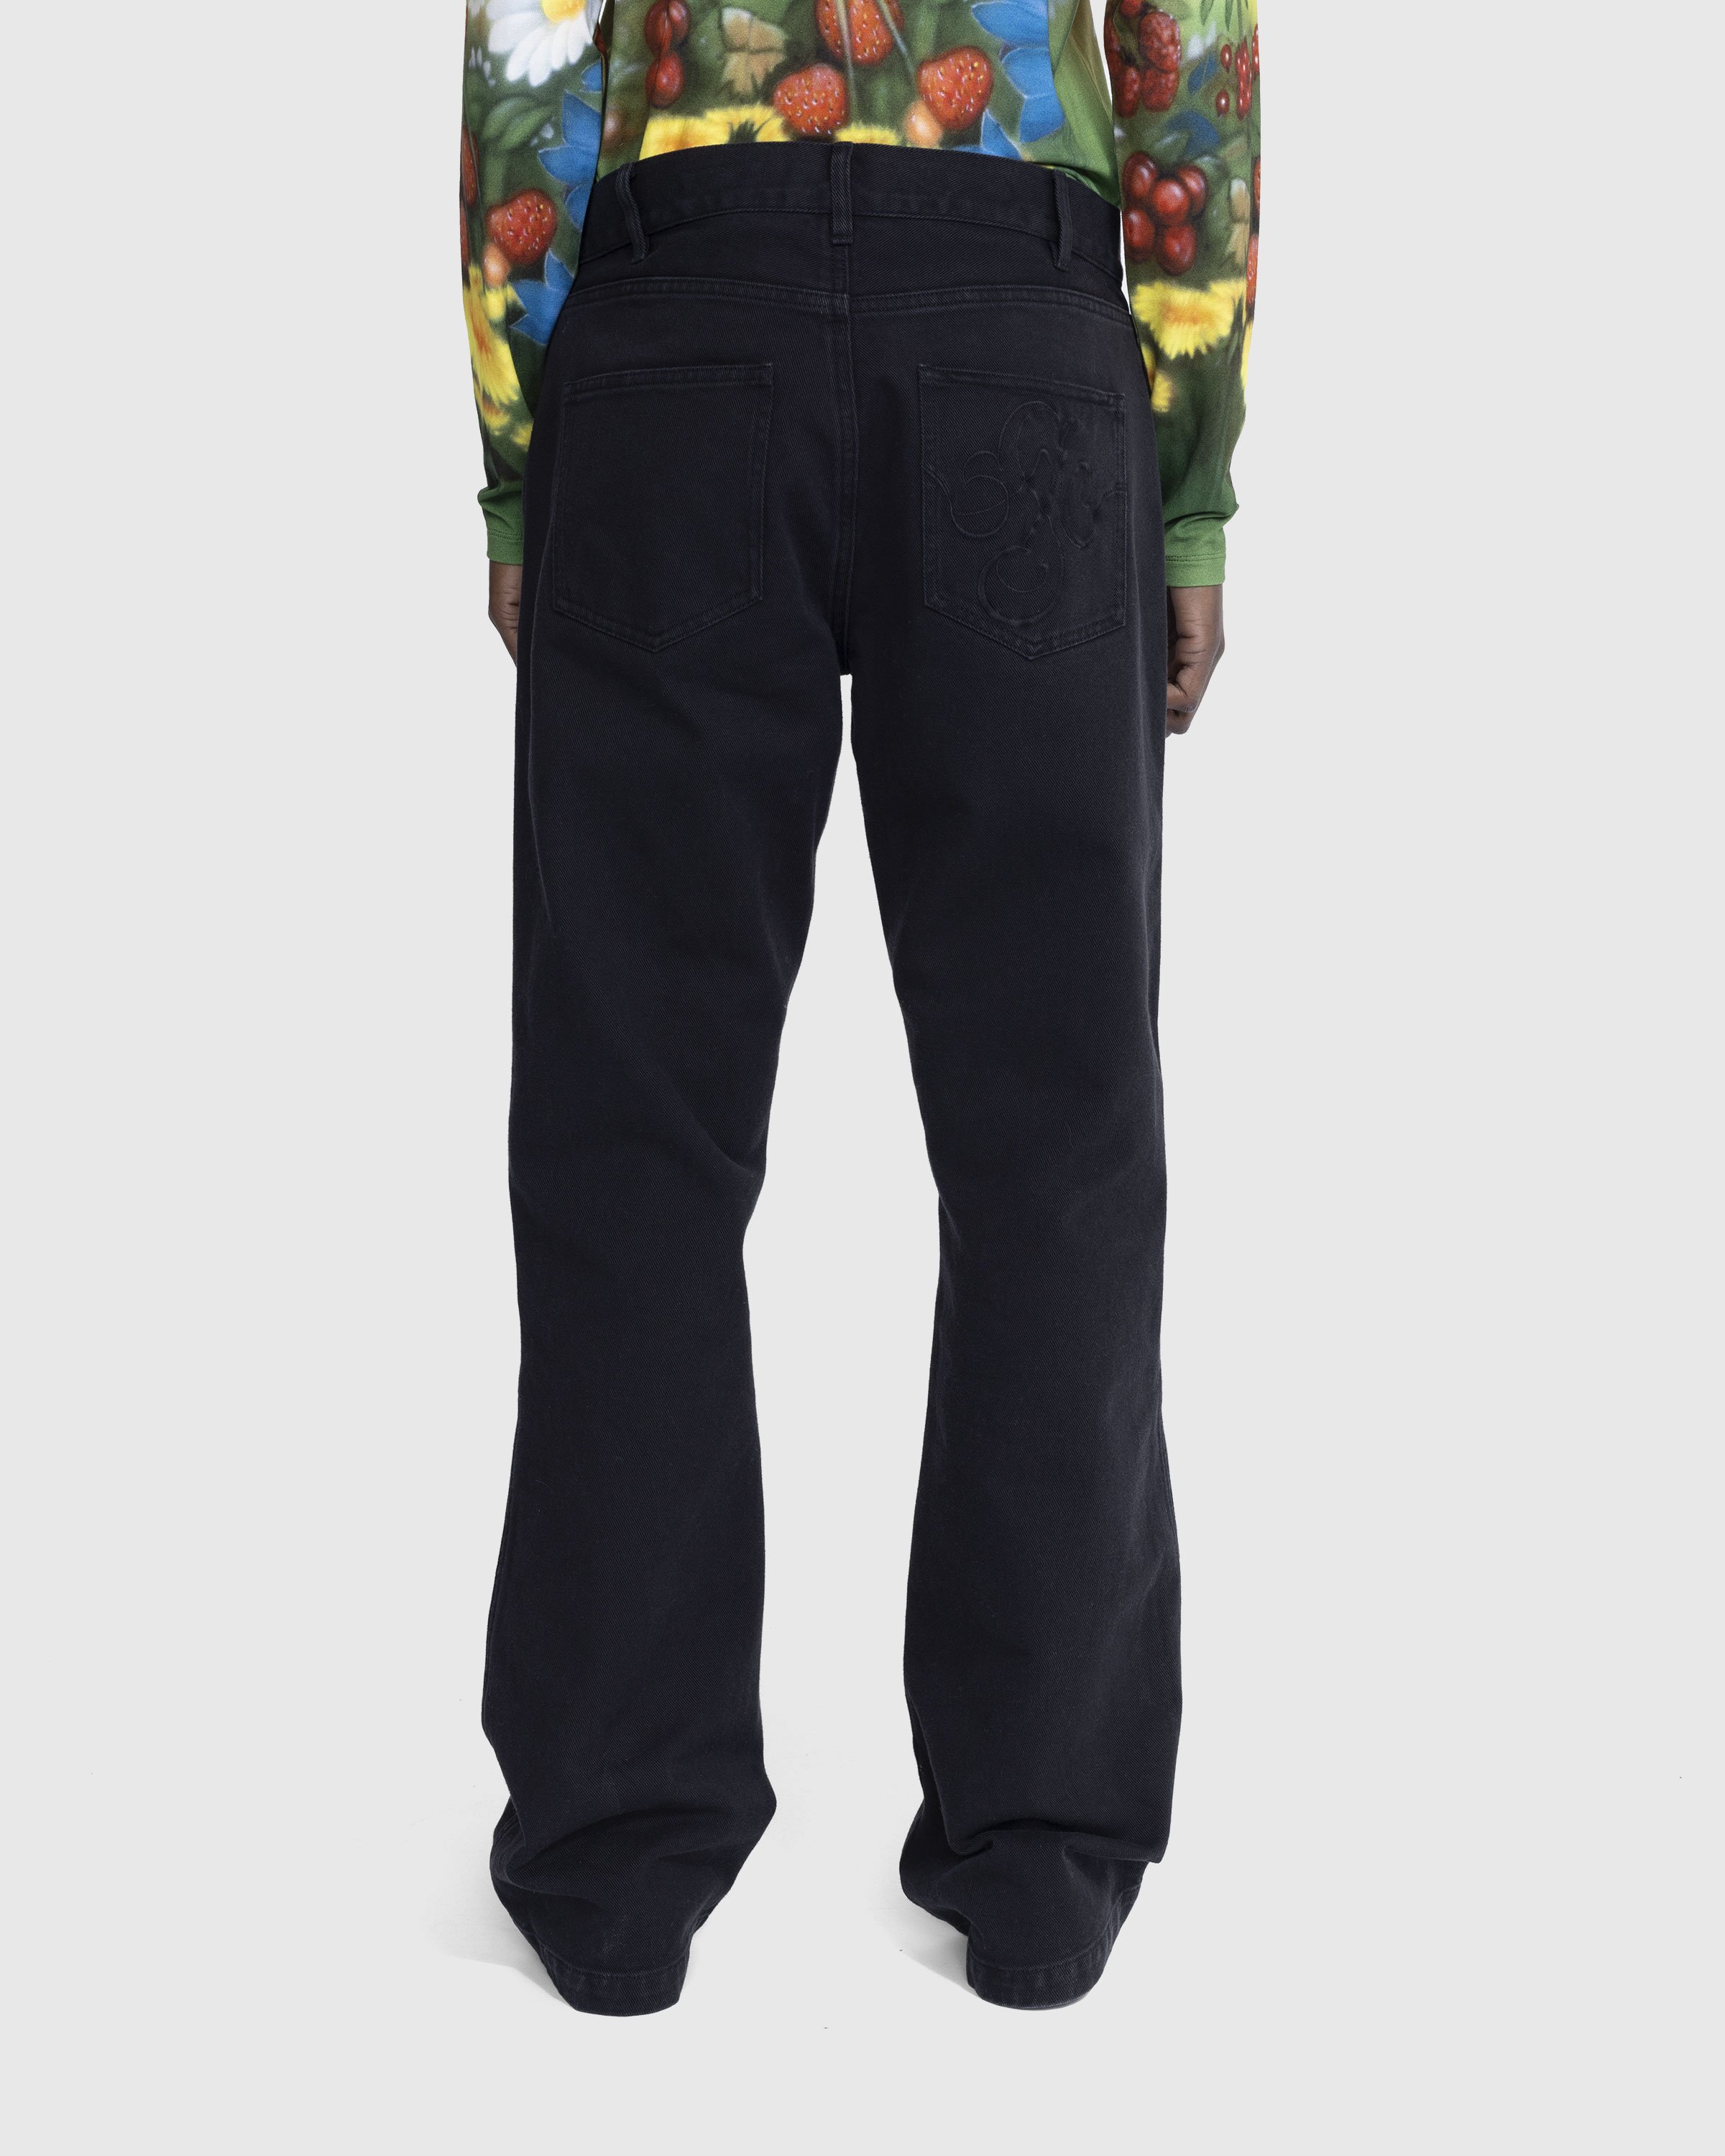 Stockholm Surfboard Club - Flared Cotton Twill Trousers Black - Clothing - Black - Image 3